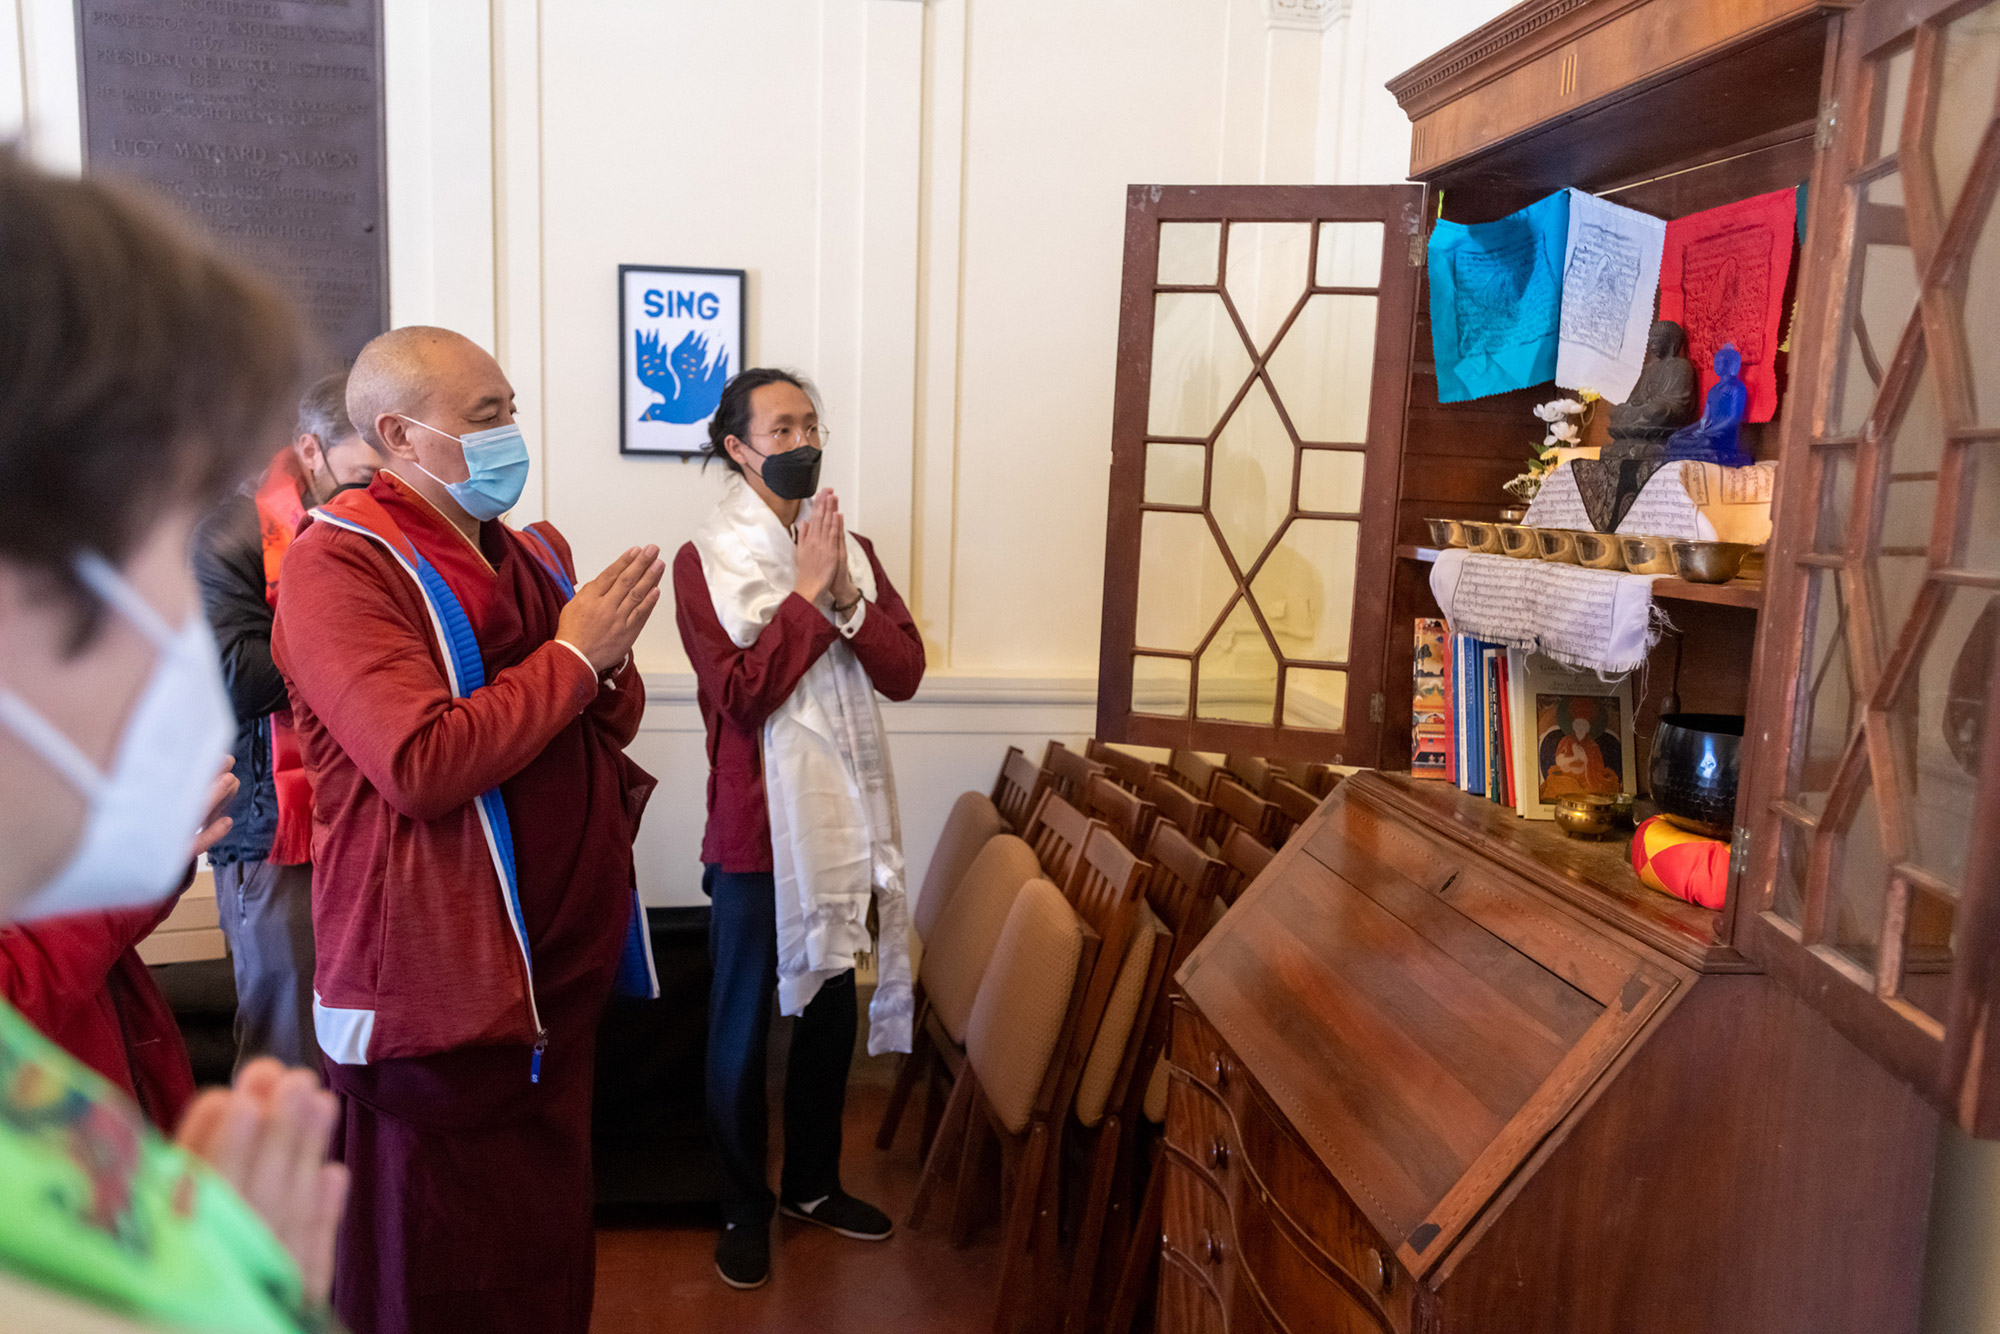 Before the blessing ceremony in the museum, Lama Topgyal visited the altar of Buddhist Sangha, Vassar’s student Buddhist organization. Far right: Edward Cai ’22, President of the Buddhist Sanga.